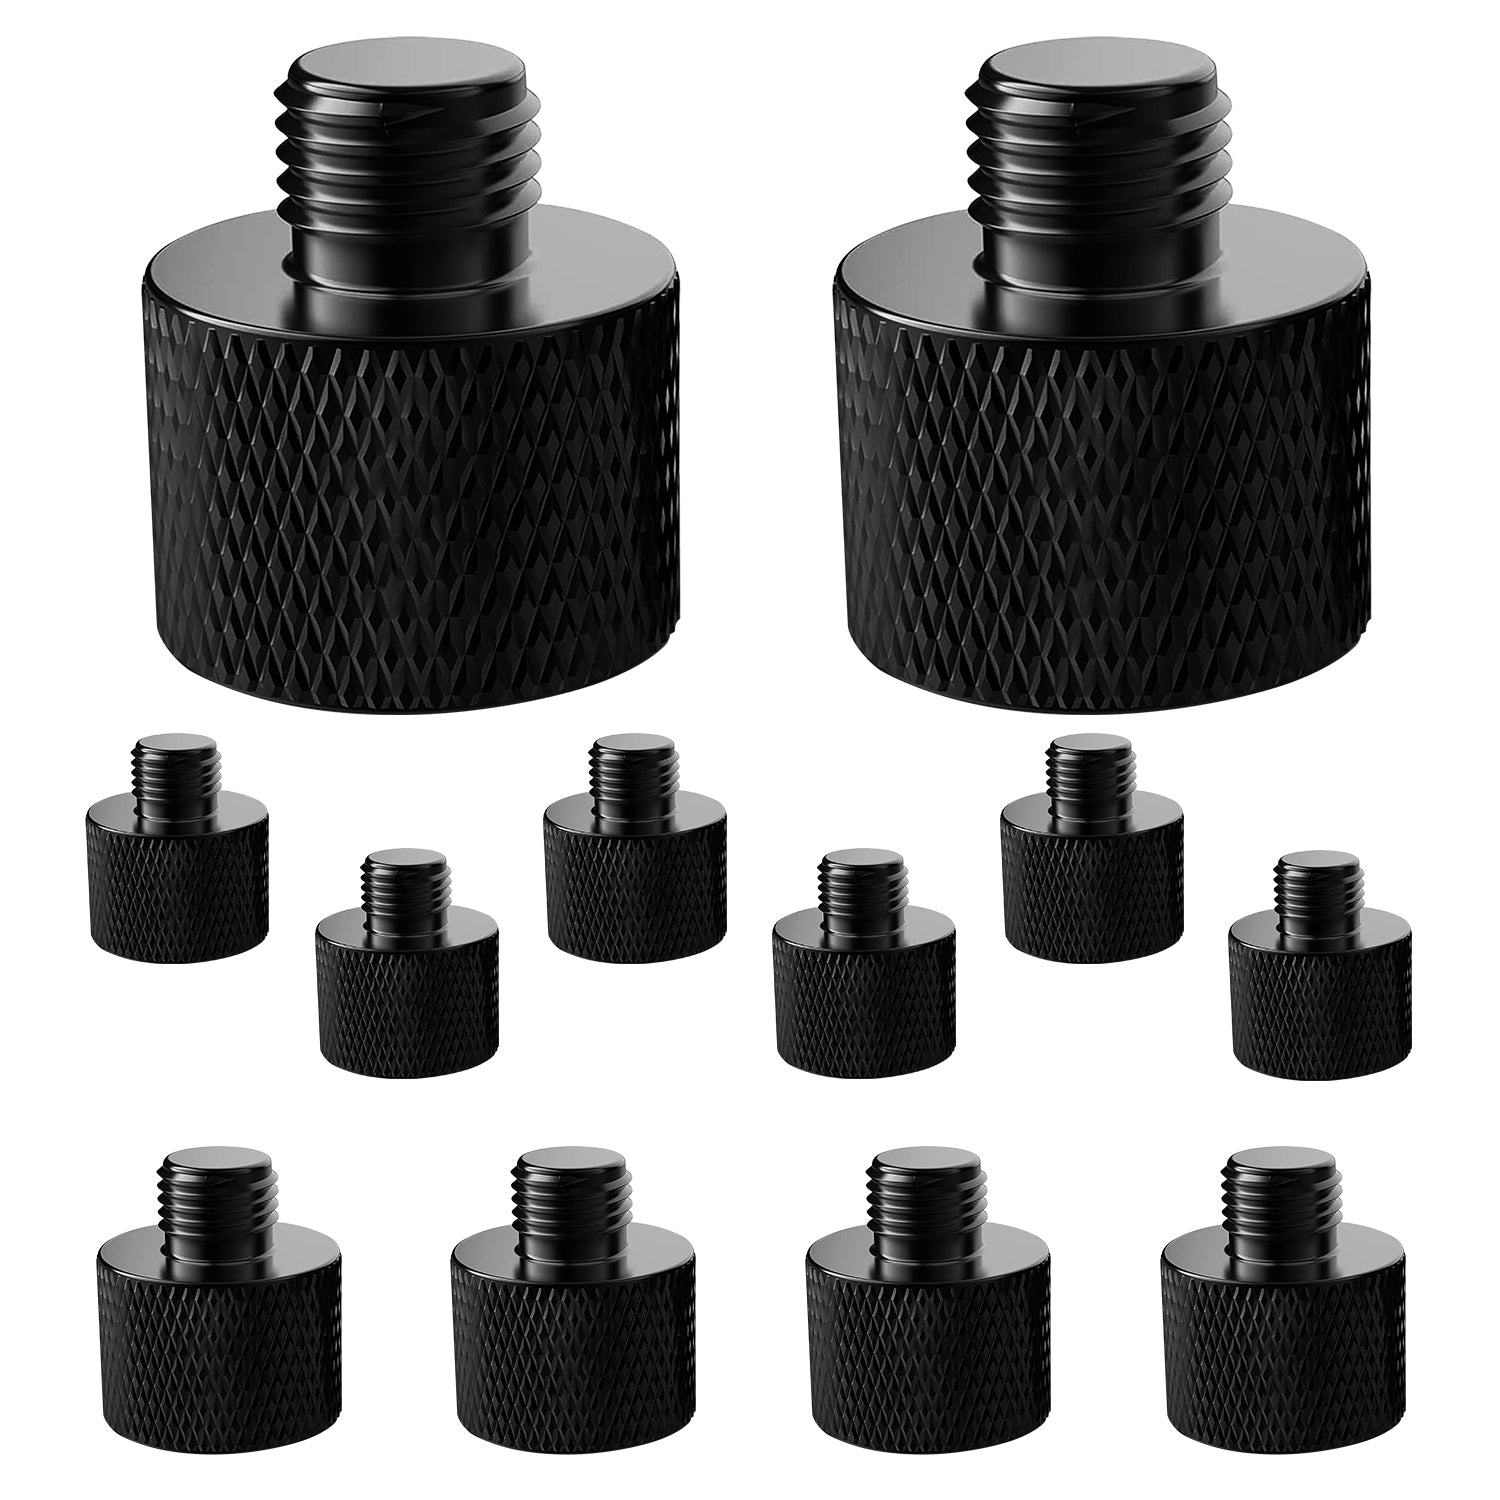 5Core Mic Stand Adapter 5/8 Female to 3/8 Male Screw Adapters For Microphone Stands & Clips 12Pcs